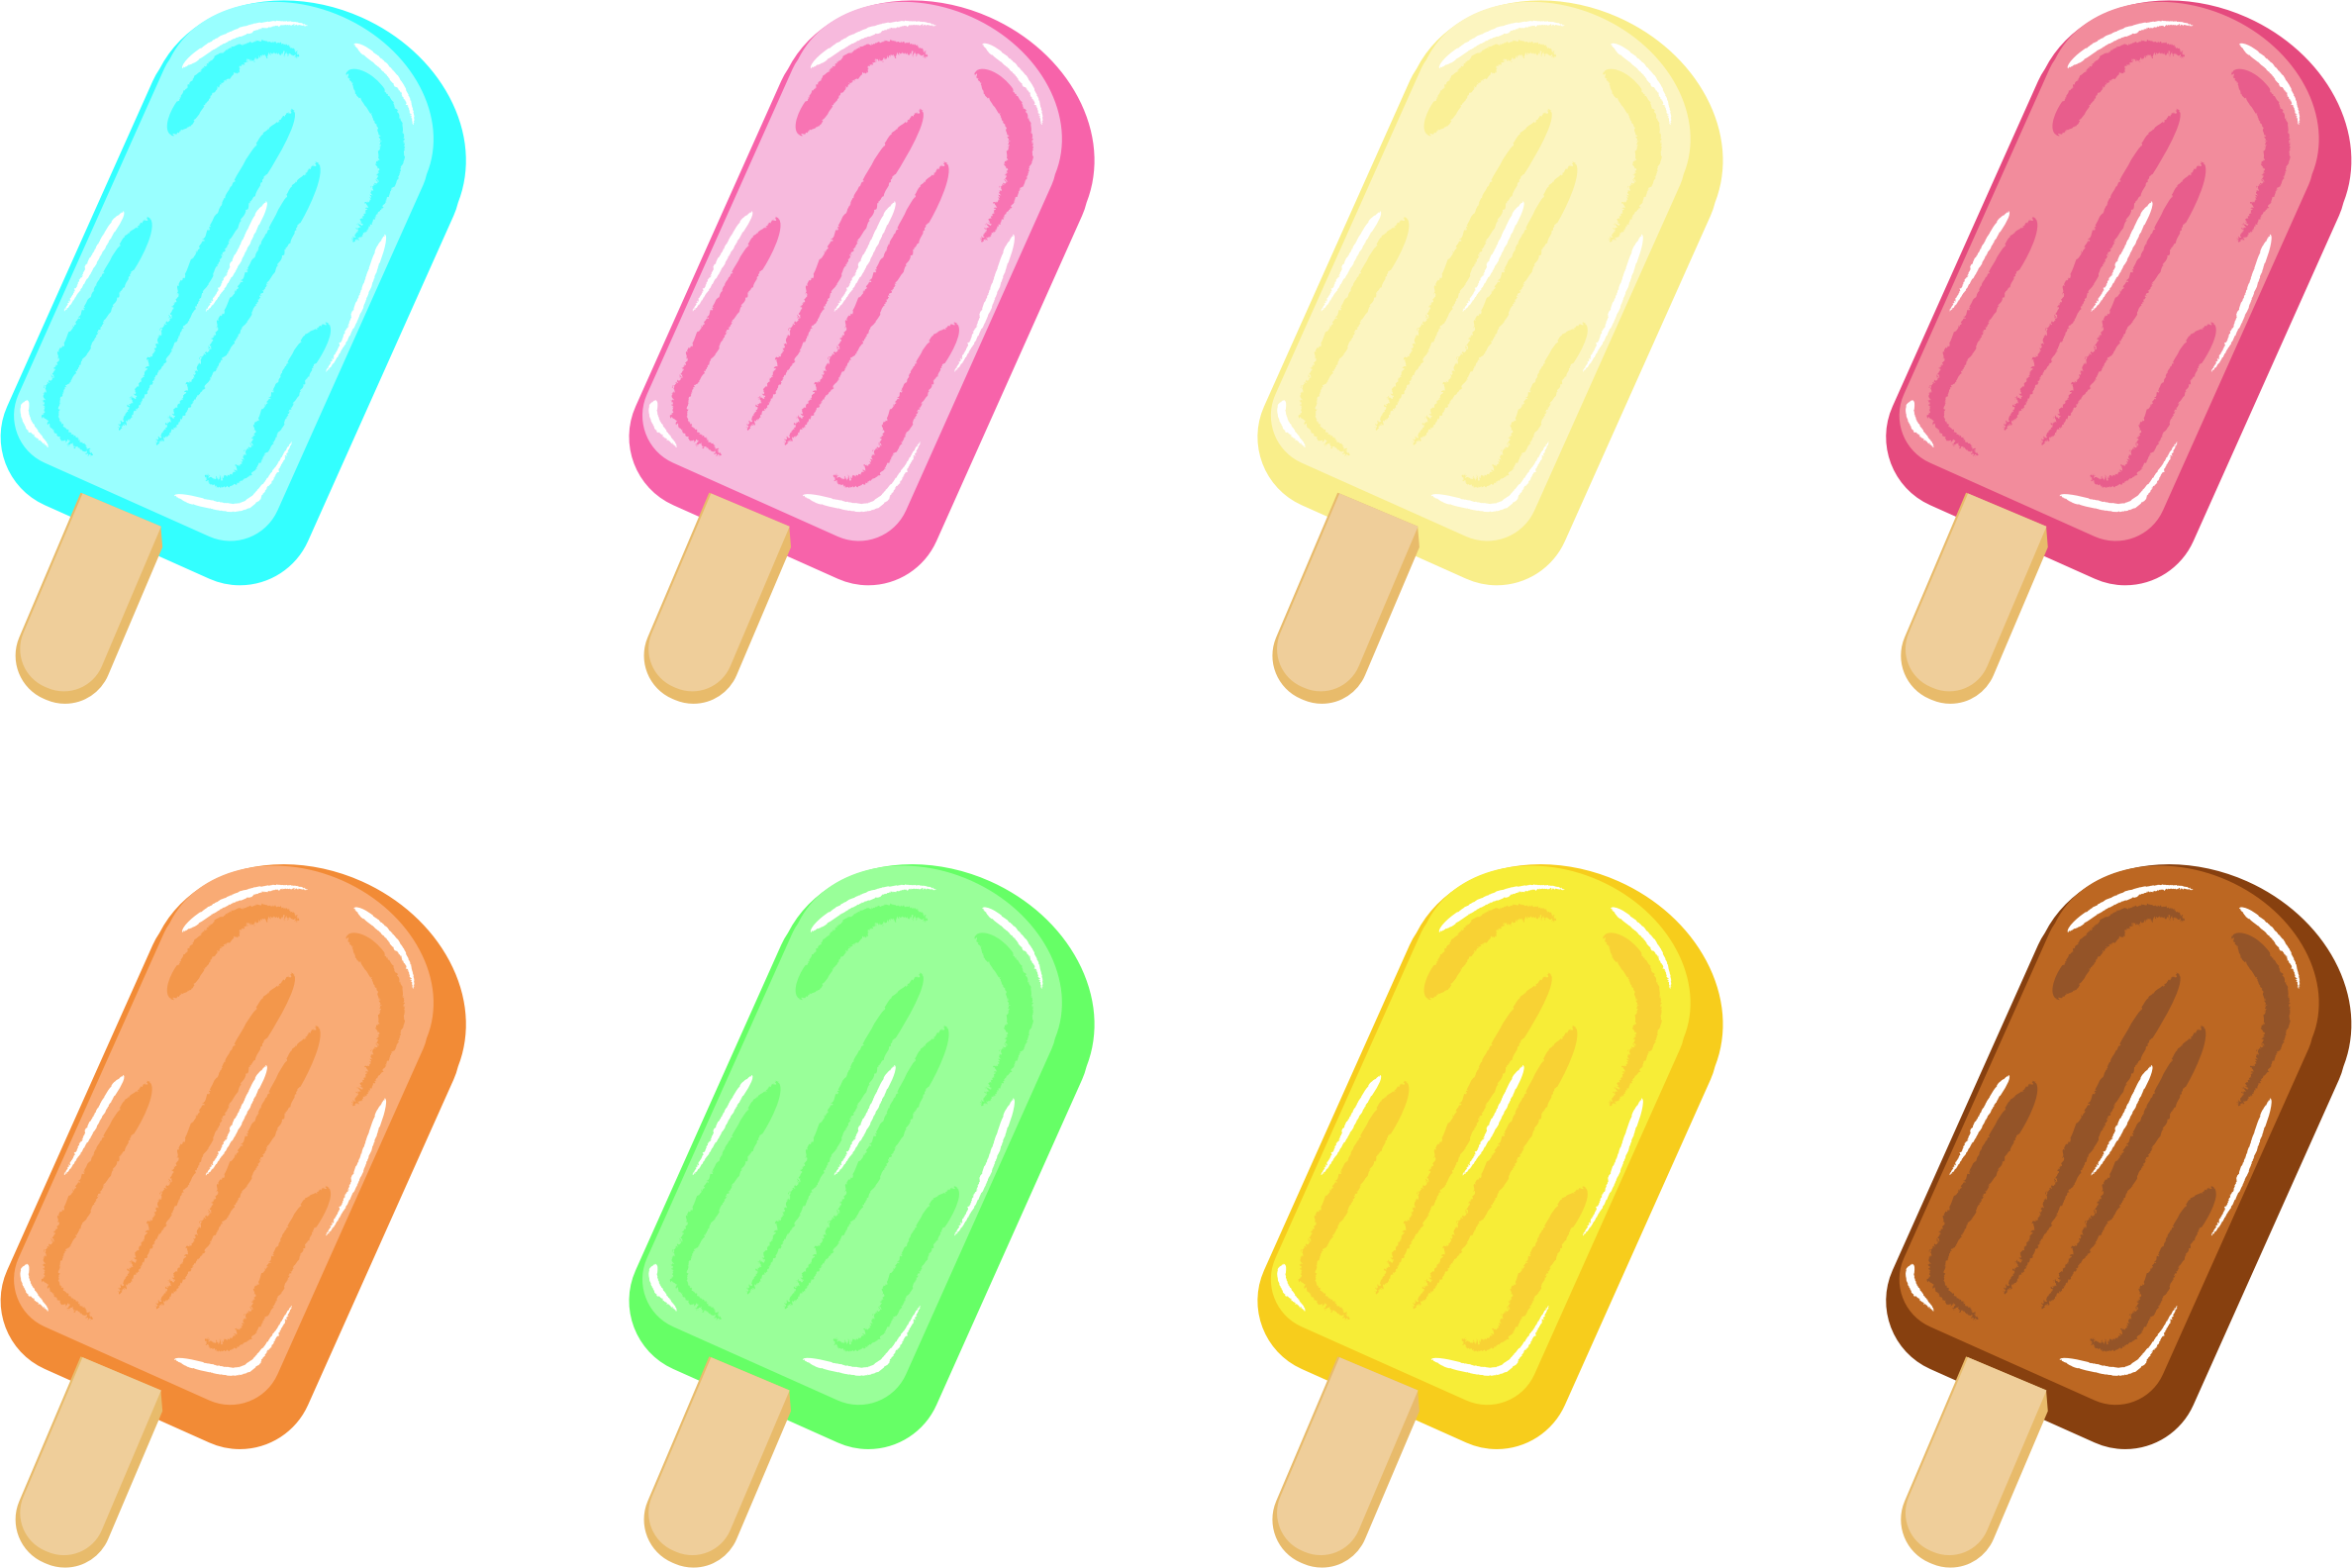 Download and share clipart about Big Image - Popsicle Clipart, Find more hi...